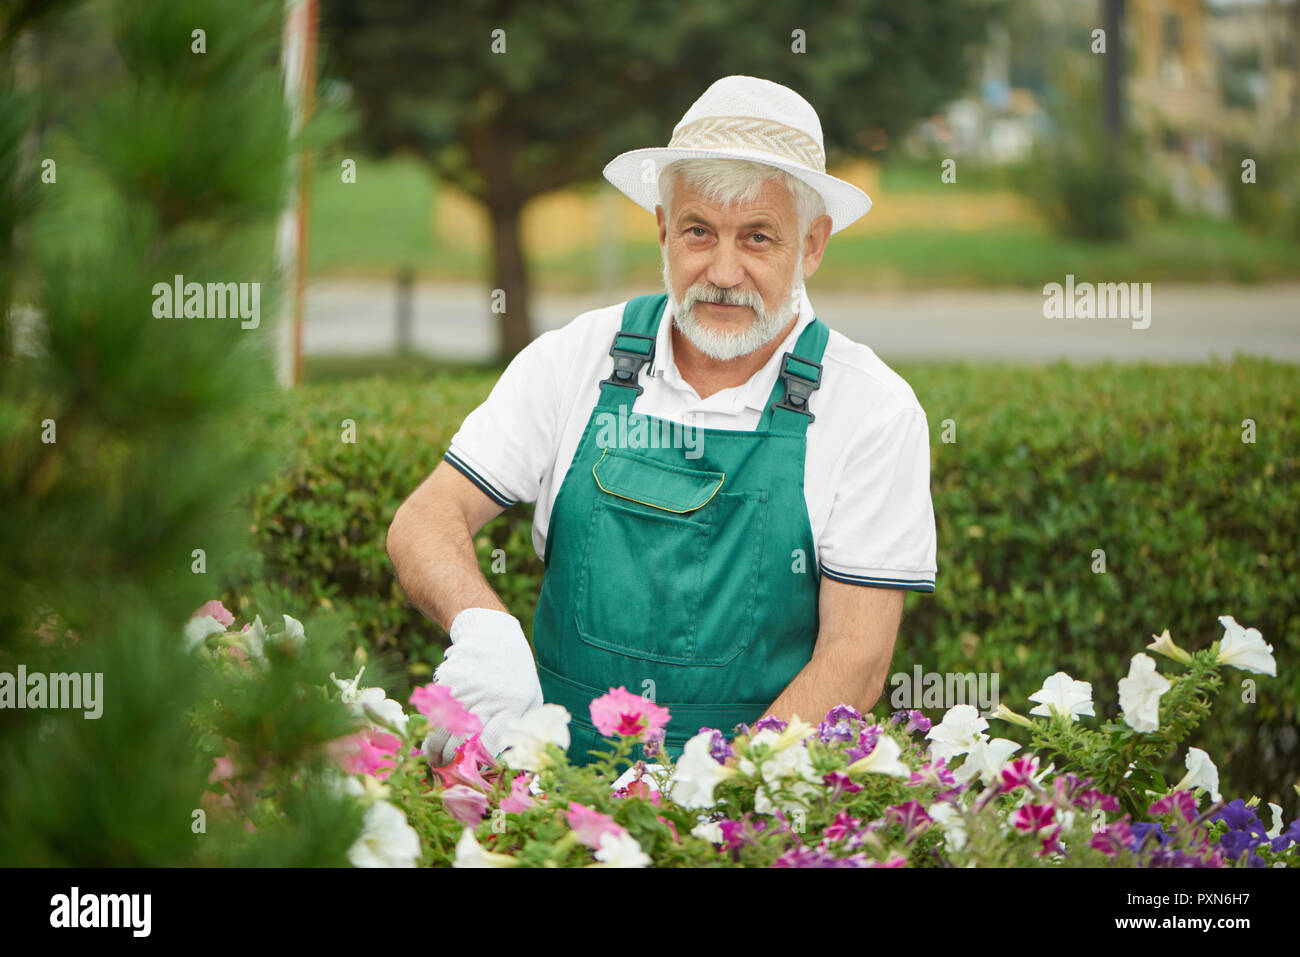 Handsome worker gardener pruning plants and flowers together. Cheerful gray haired bearded man wearing in special overalls with protective glove and light bonnet, cutting flower in garden with plants. Stock Photo